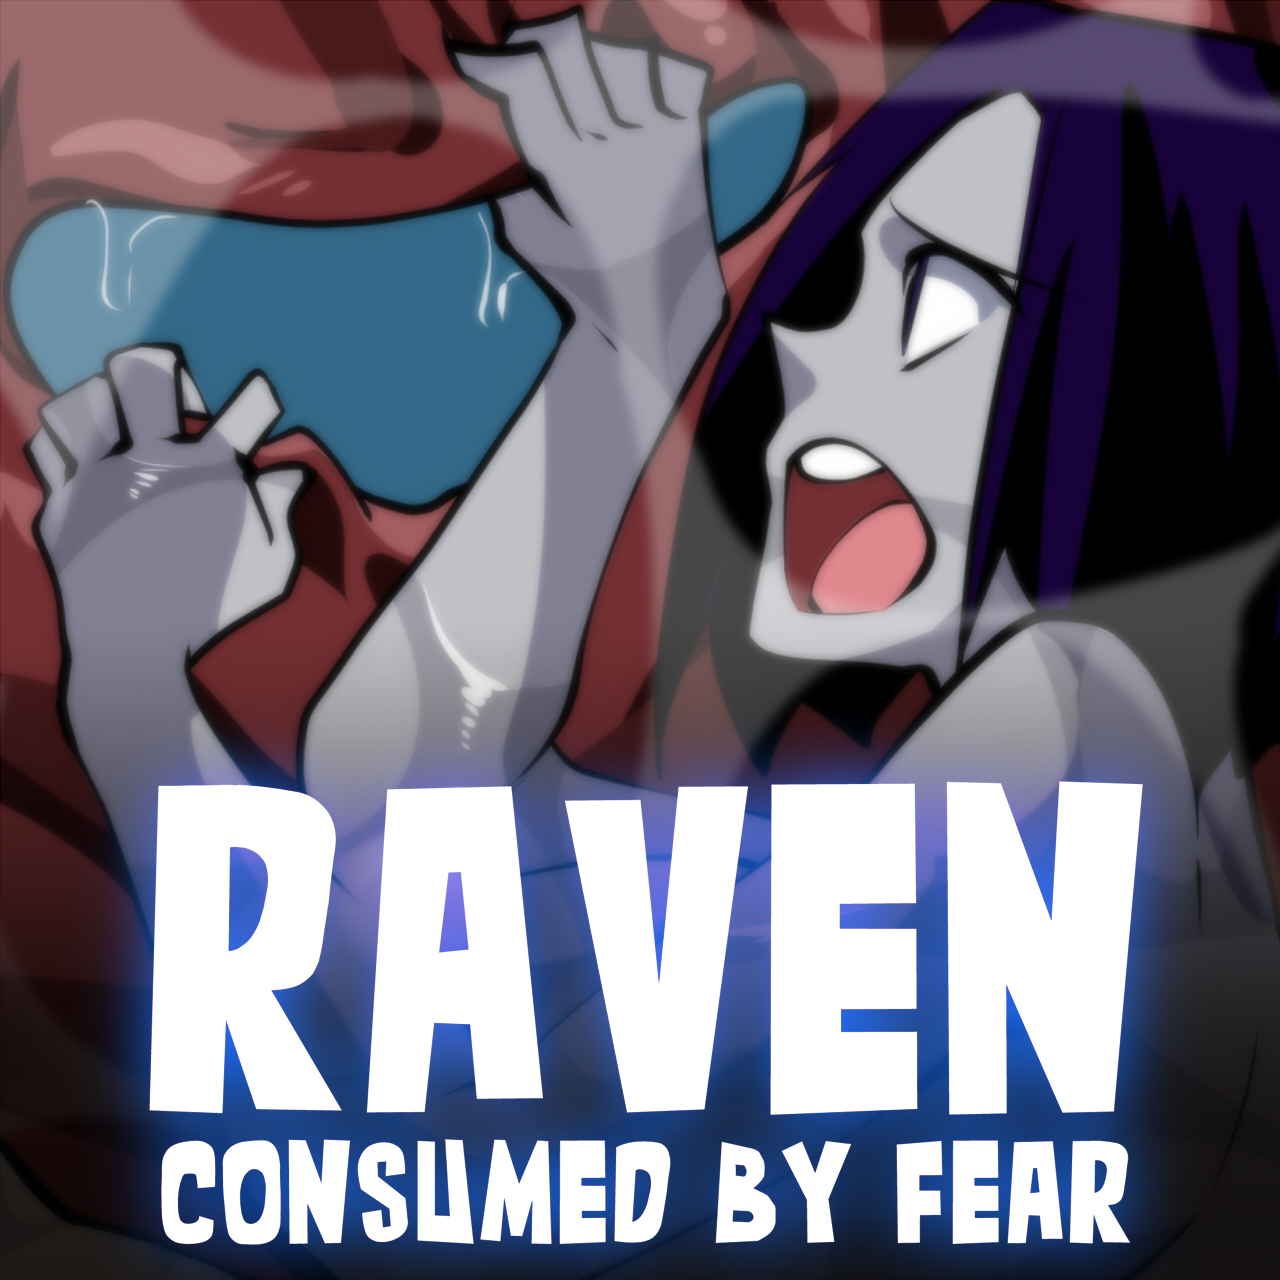 Raven: Consumed by Fear